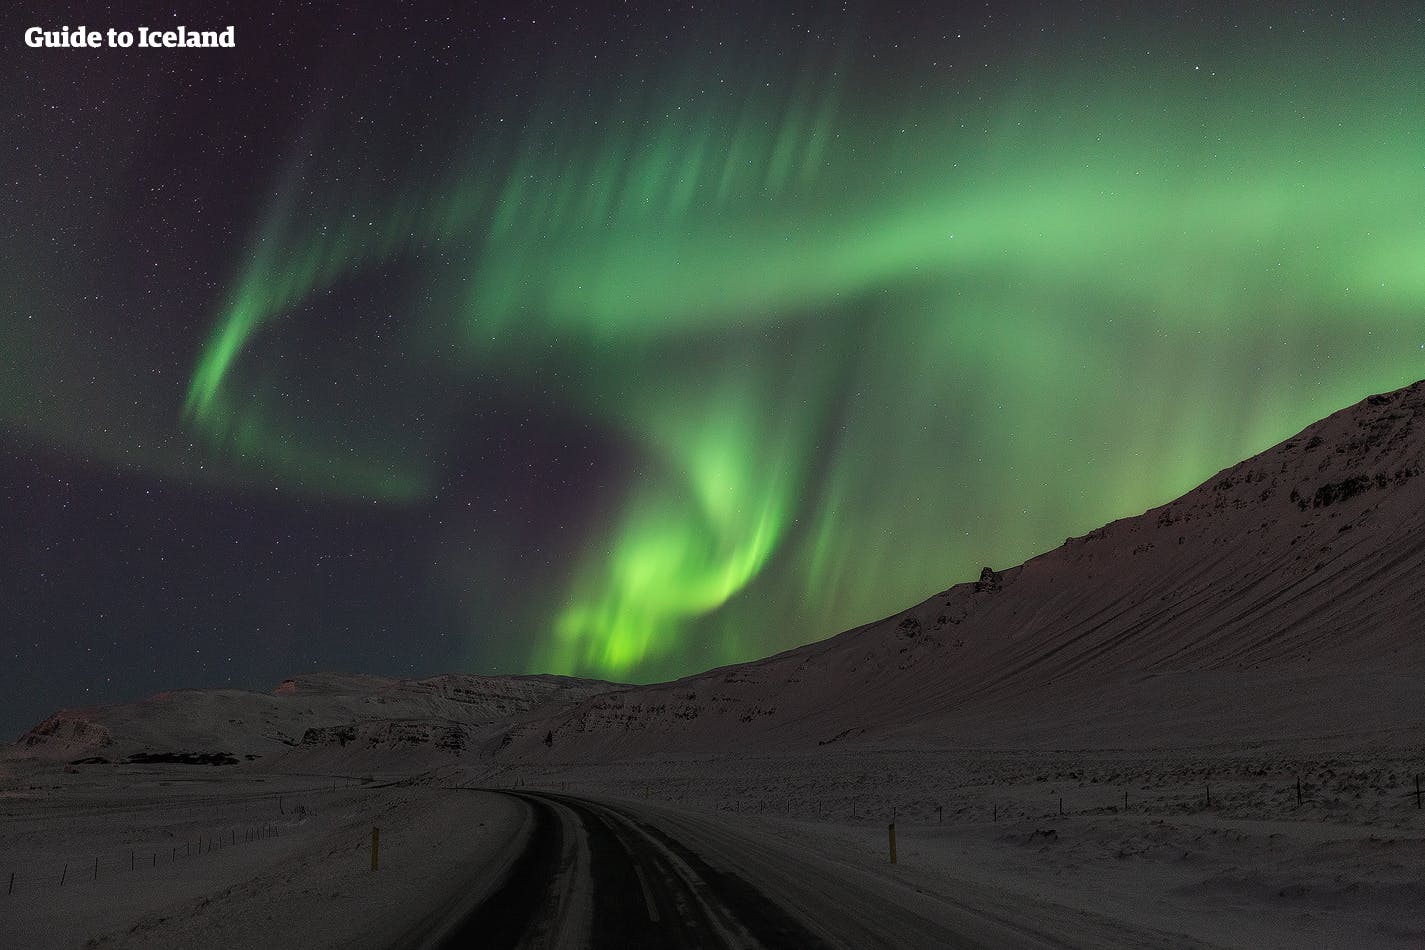 Northern Lights in Iceland - Where To See Aurora | Guide to Iceland